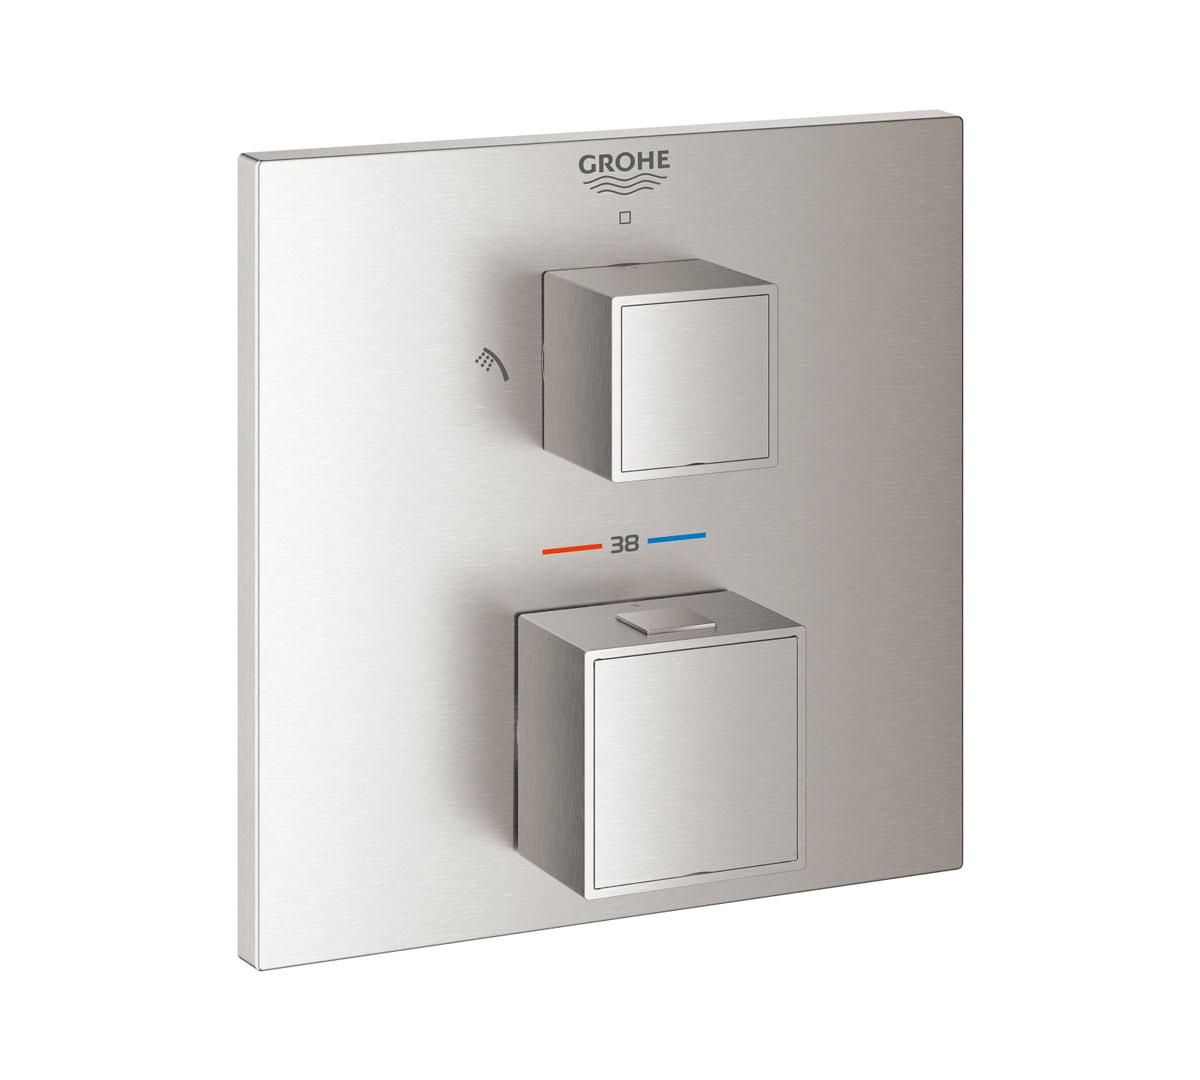 Grohe-Grohtherm Thermostatic Mixer For 2 Outlets With Integrated Shut Off/Diverter Valve  Supersteel